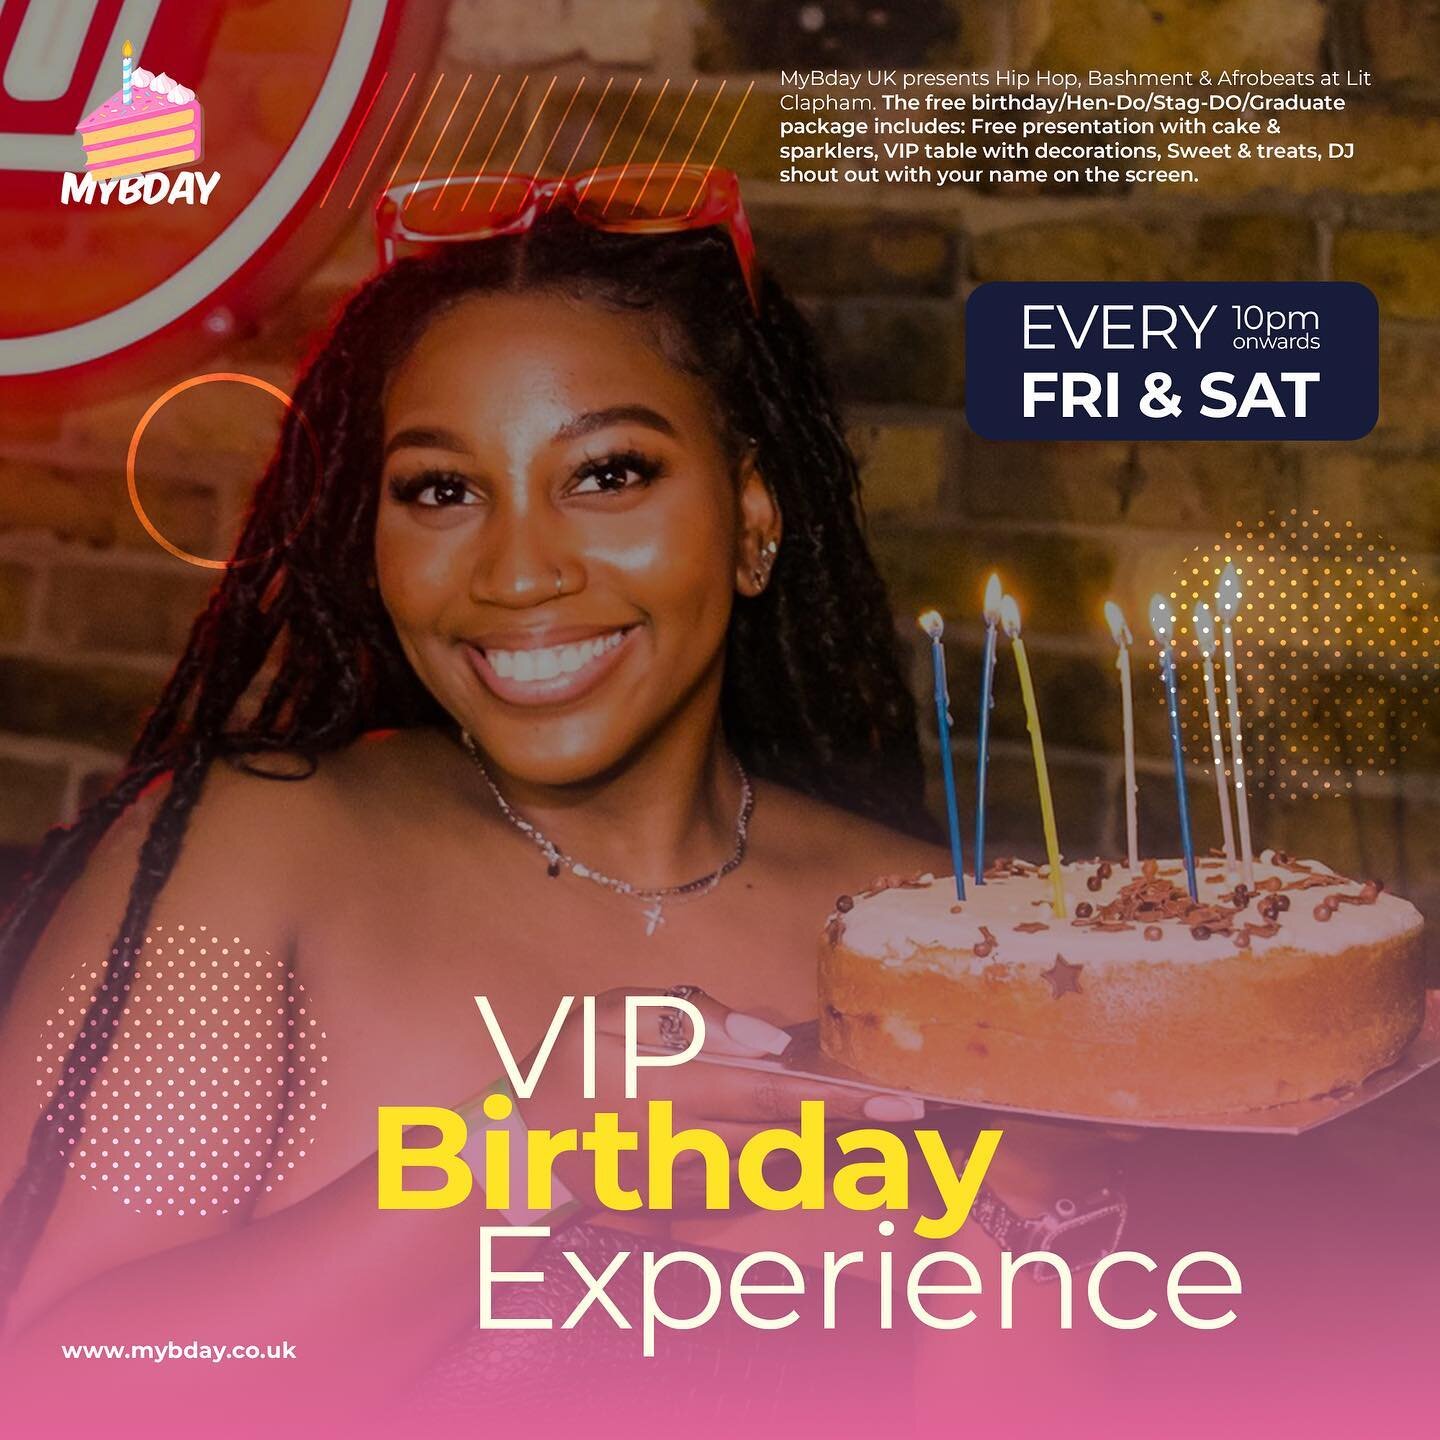 Celebrate all things Bashment, Hip-Hop &amp; Afrobeats every Friday and Saturday at Lit Clapham with a VIP Birthday Package! 🔥🎉

The free birthday package includes:
 🎉 Free presentation with cake &amp; sparklers 🔥 VIP table with decorations 🍬 Sw